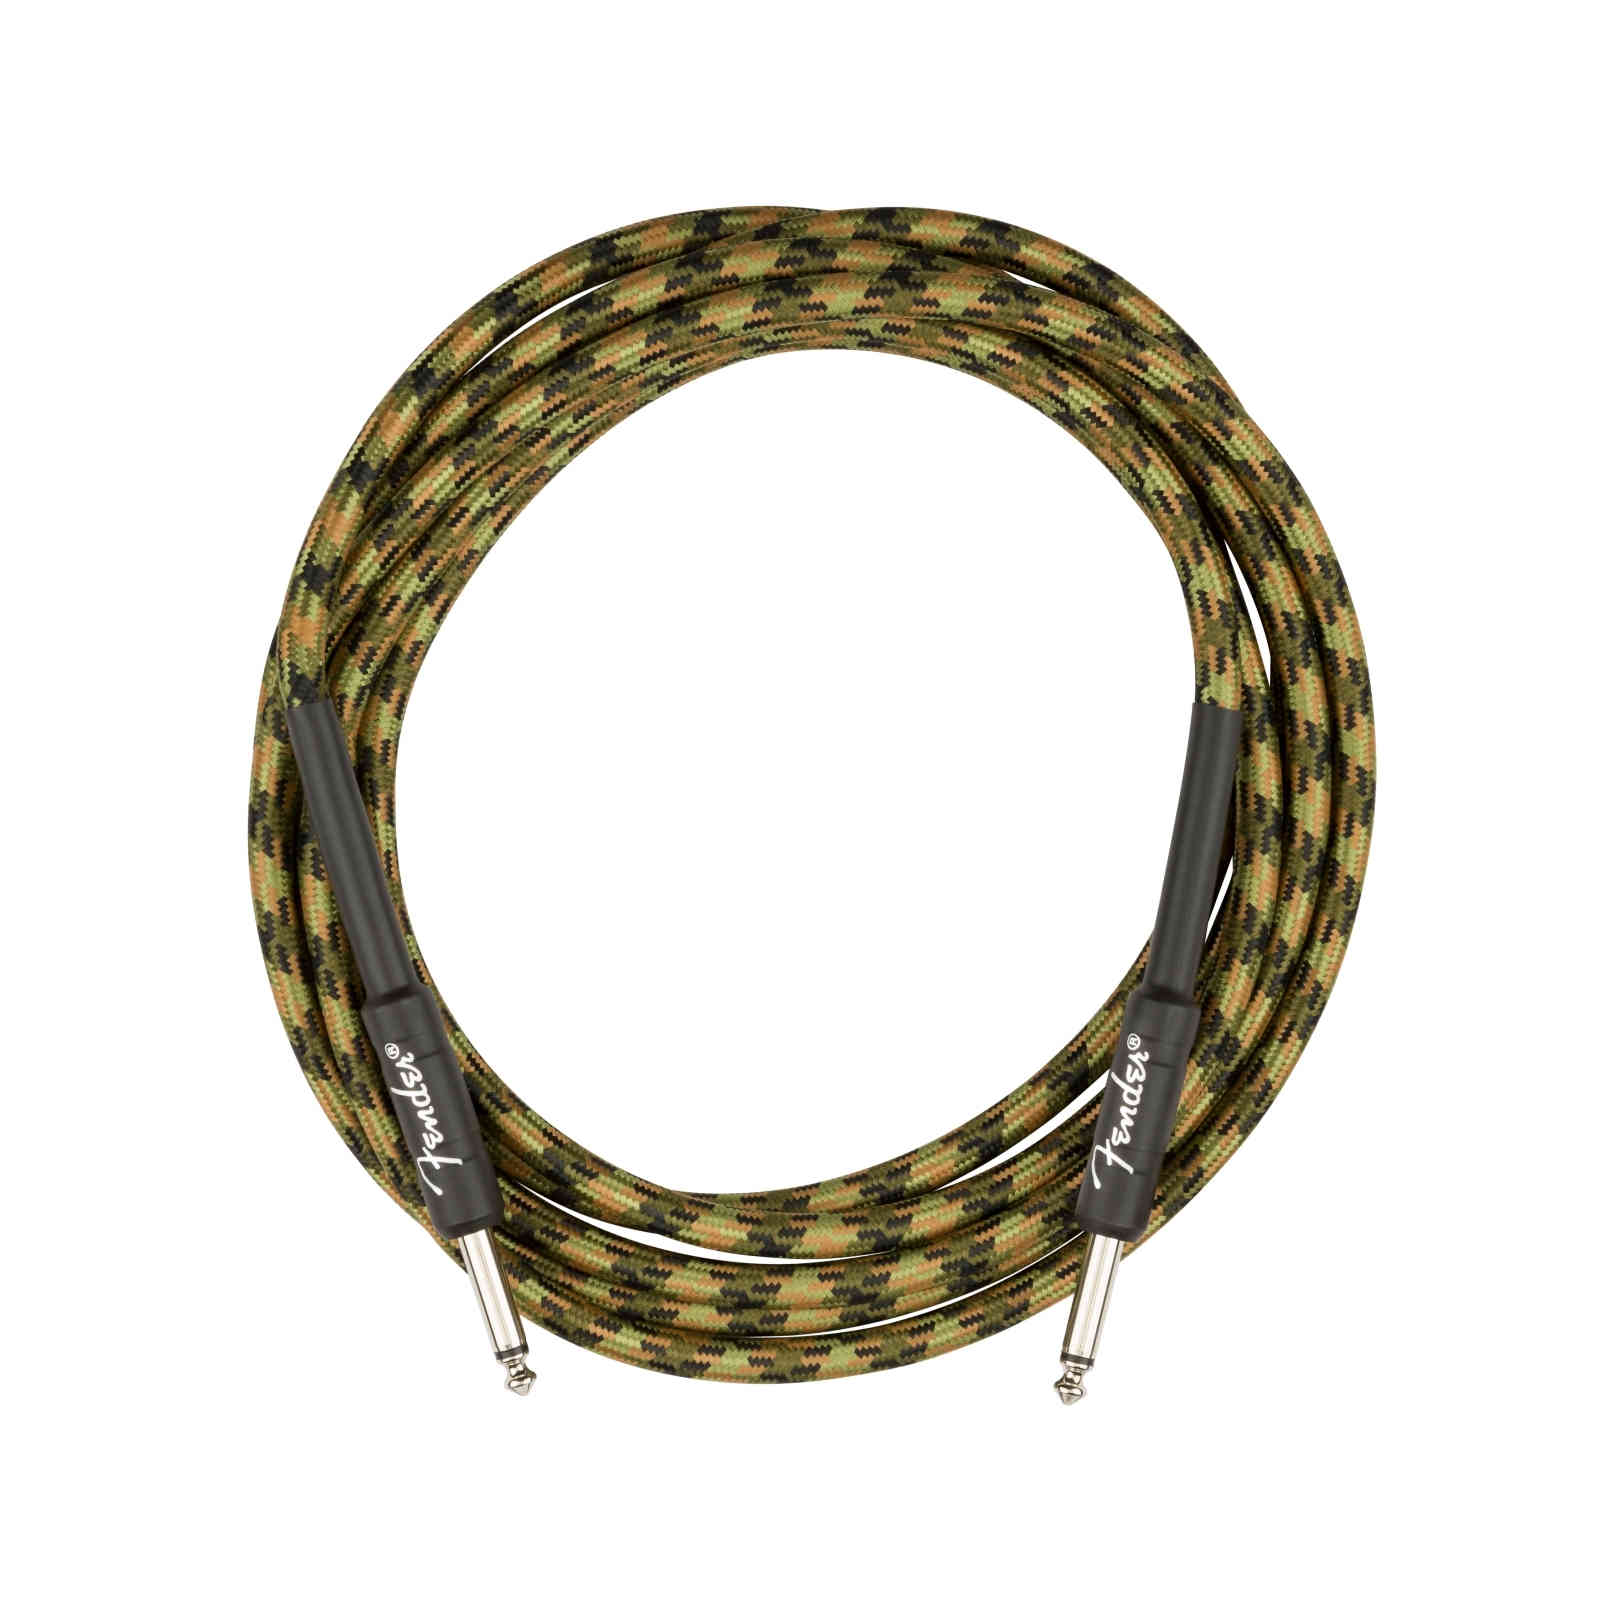 Fender Professional Series Instrument Cable, 18.6 FT, Woodland Camo